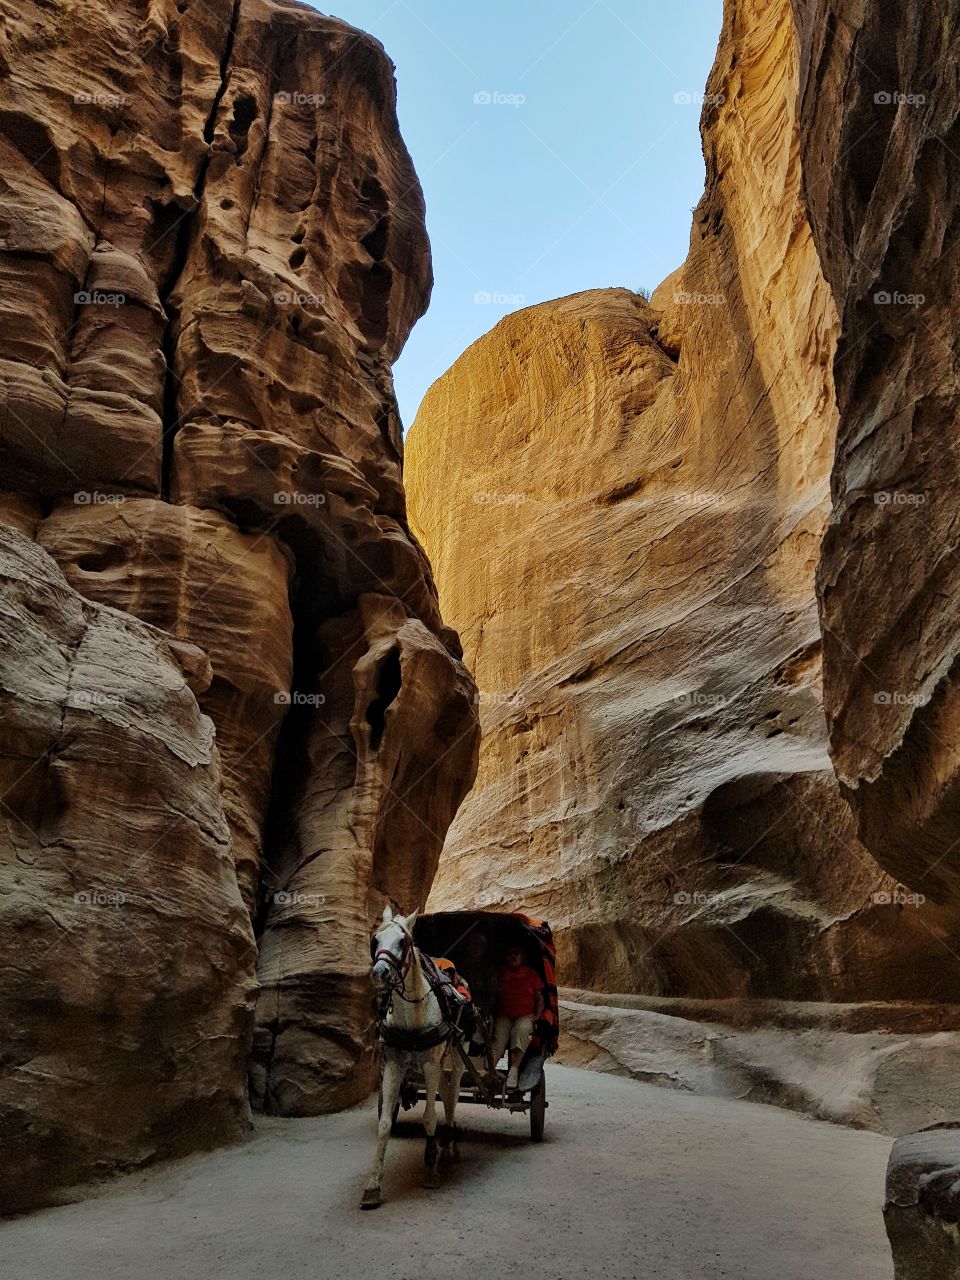 on the way to petra